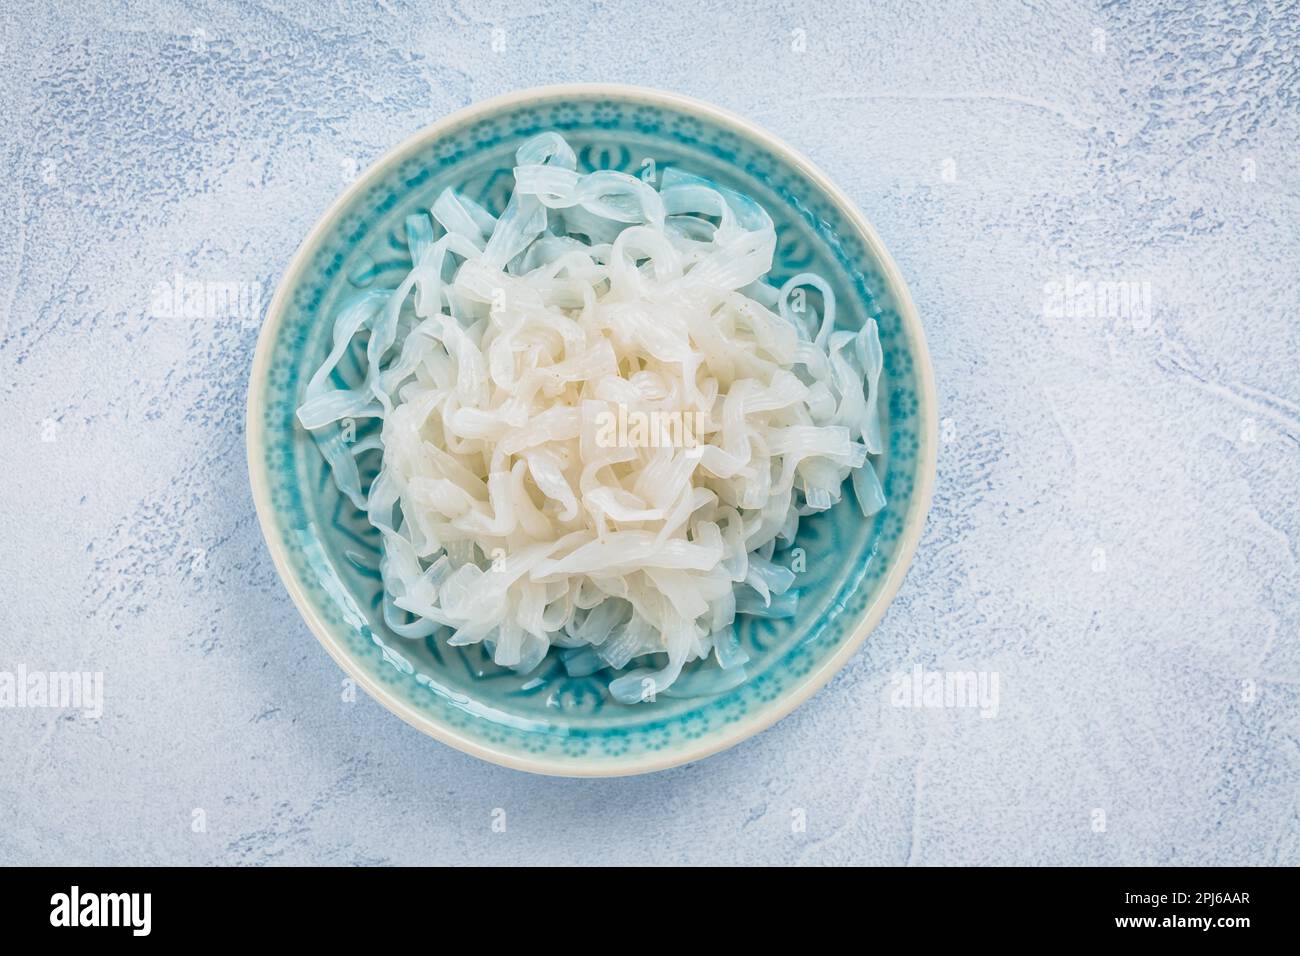 Shirataki noodles - gelatinous traditional Japanese noodles made from the konjac yam, carbohydrate and gluten free alternative Stock Photo